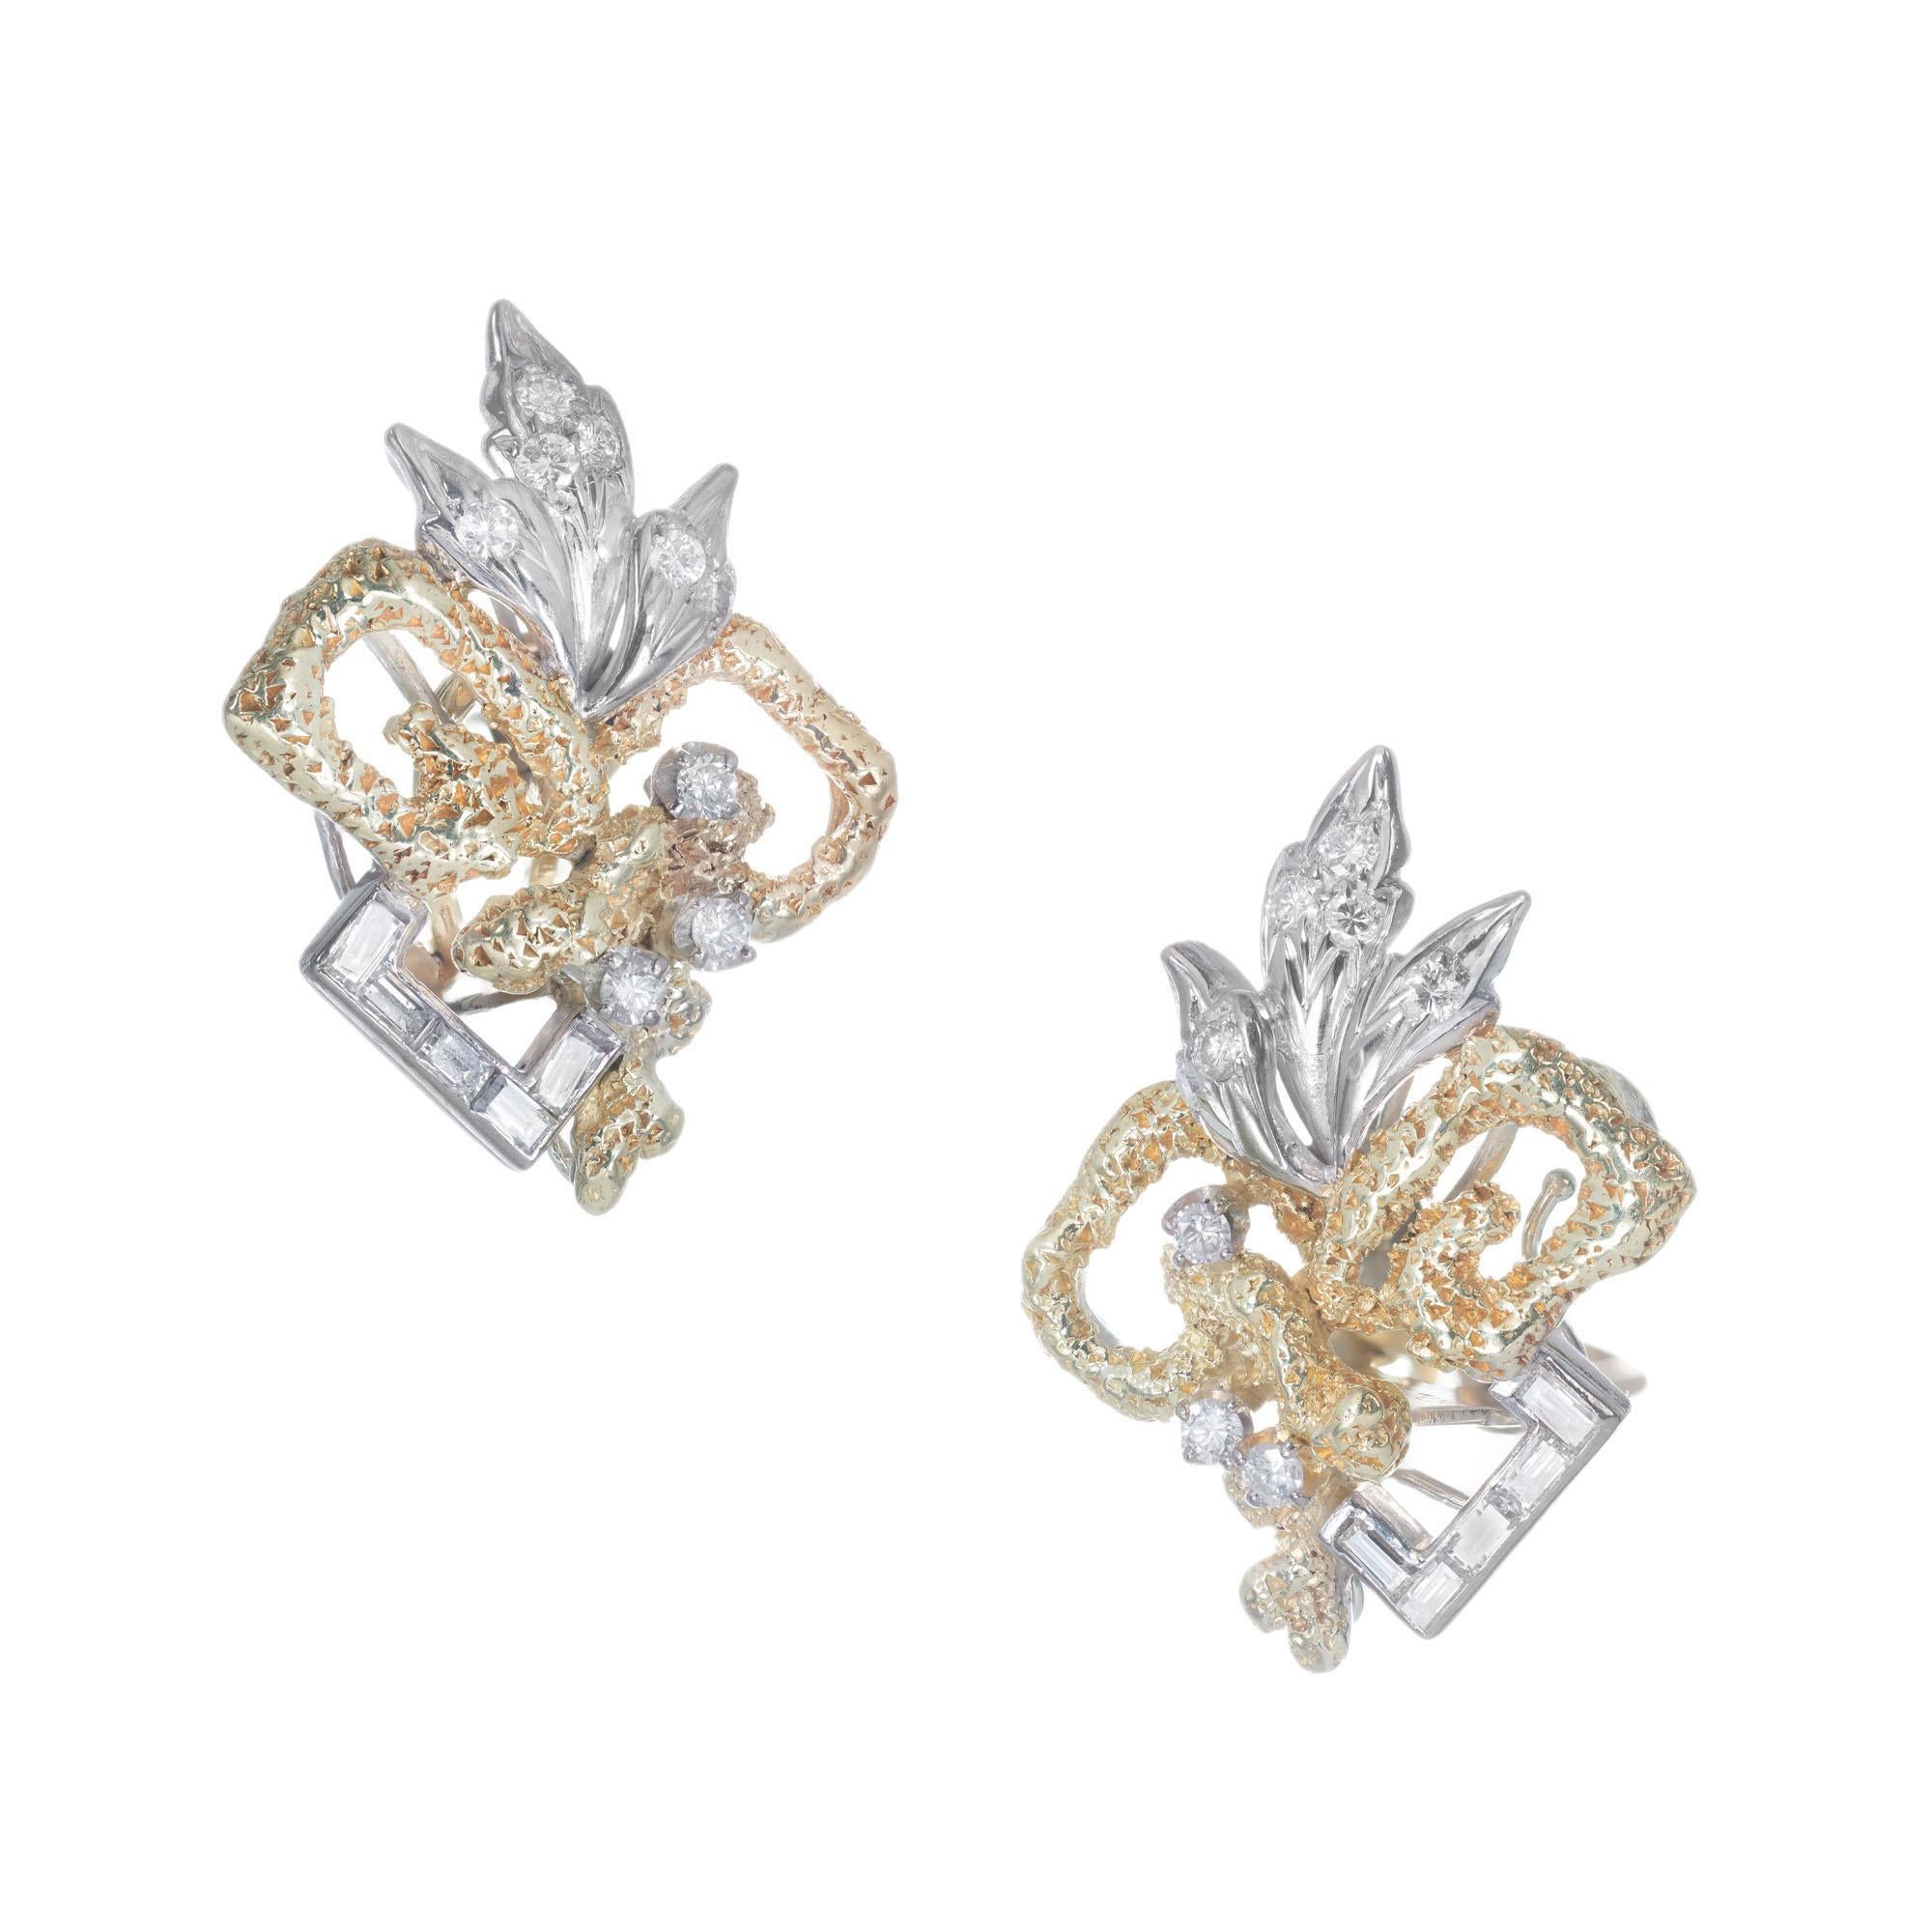 1970's 14k yellow and white gold clip post free form earrings, accented with baguette and round cut diamonds.

18 round brilliant cut diamonds, H-I VS-SI approx. .32cts
10 straight baguette cut diamonds, I VS-SI approx. .30cts
14k yellow gold 
14k